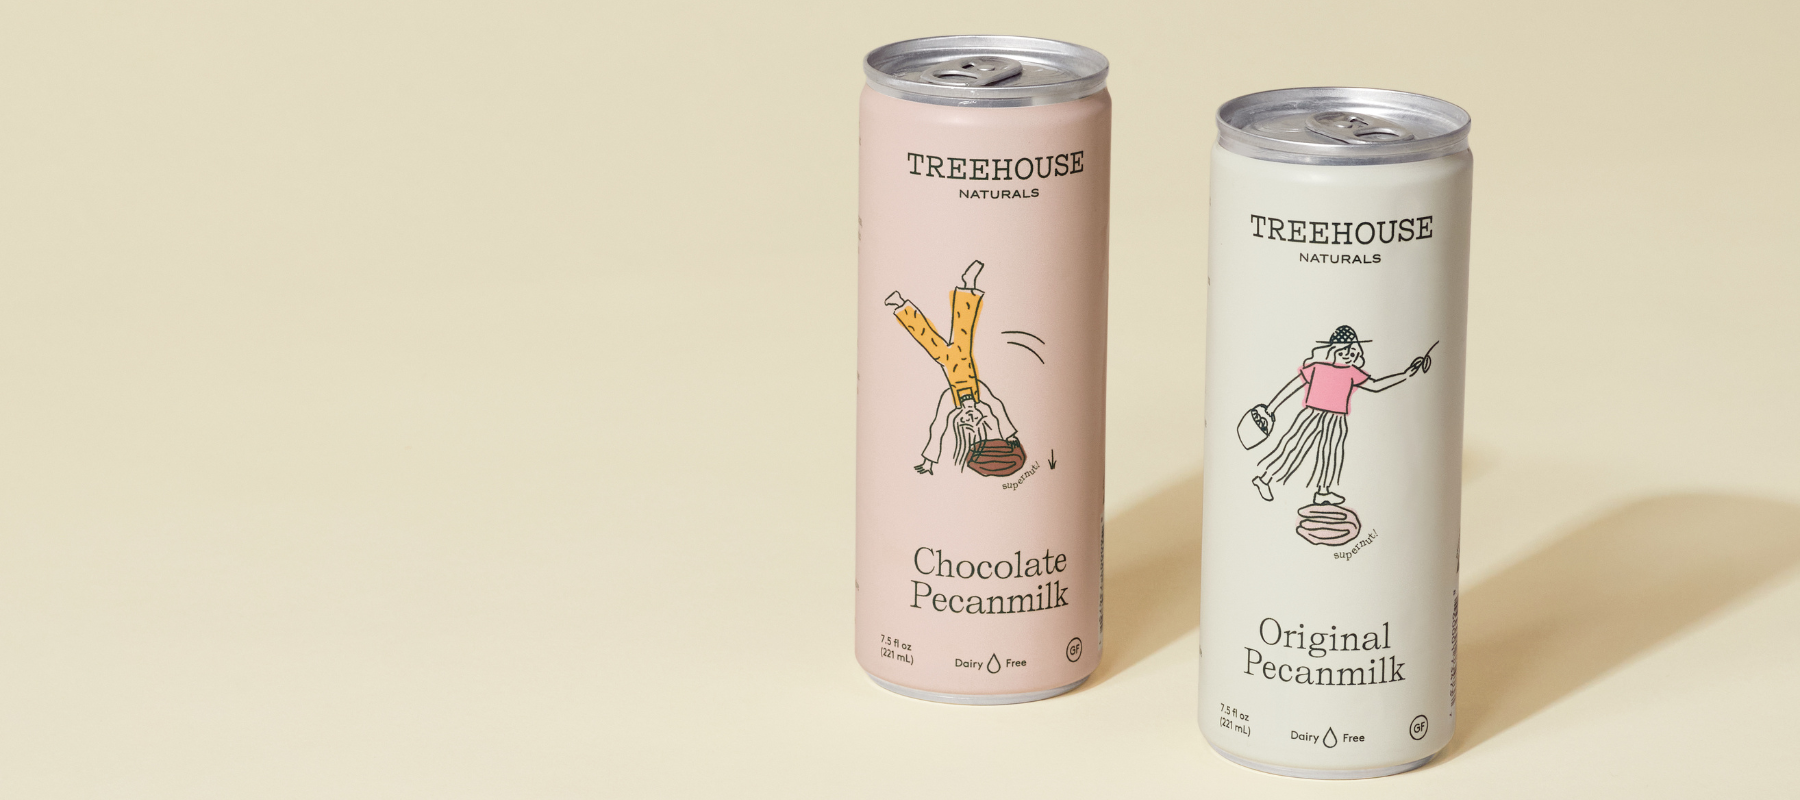 Two cans of Treehouse Naturals pecan milk